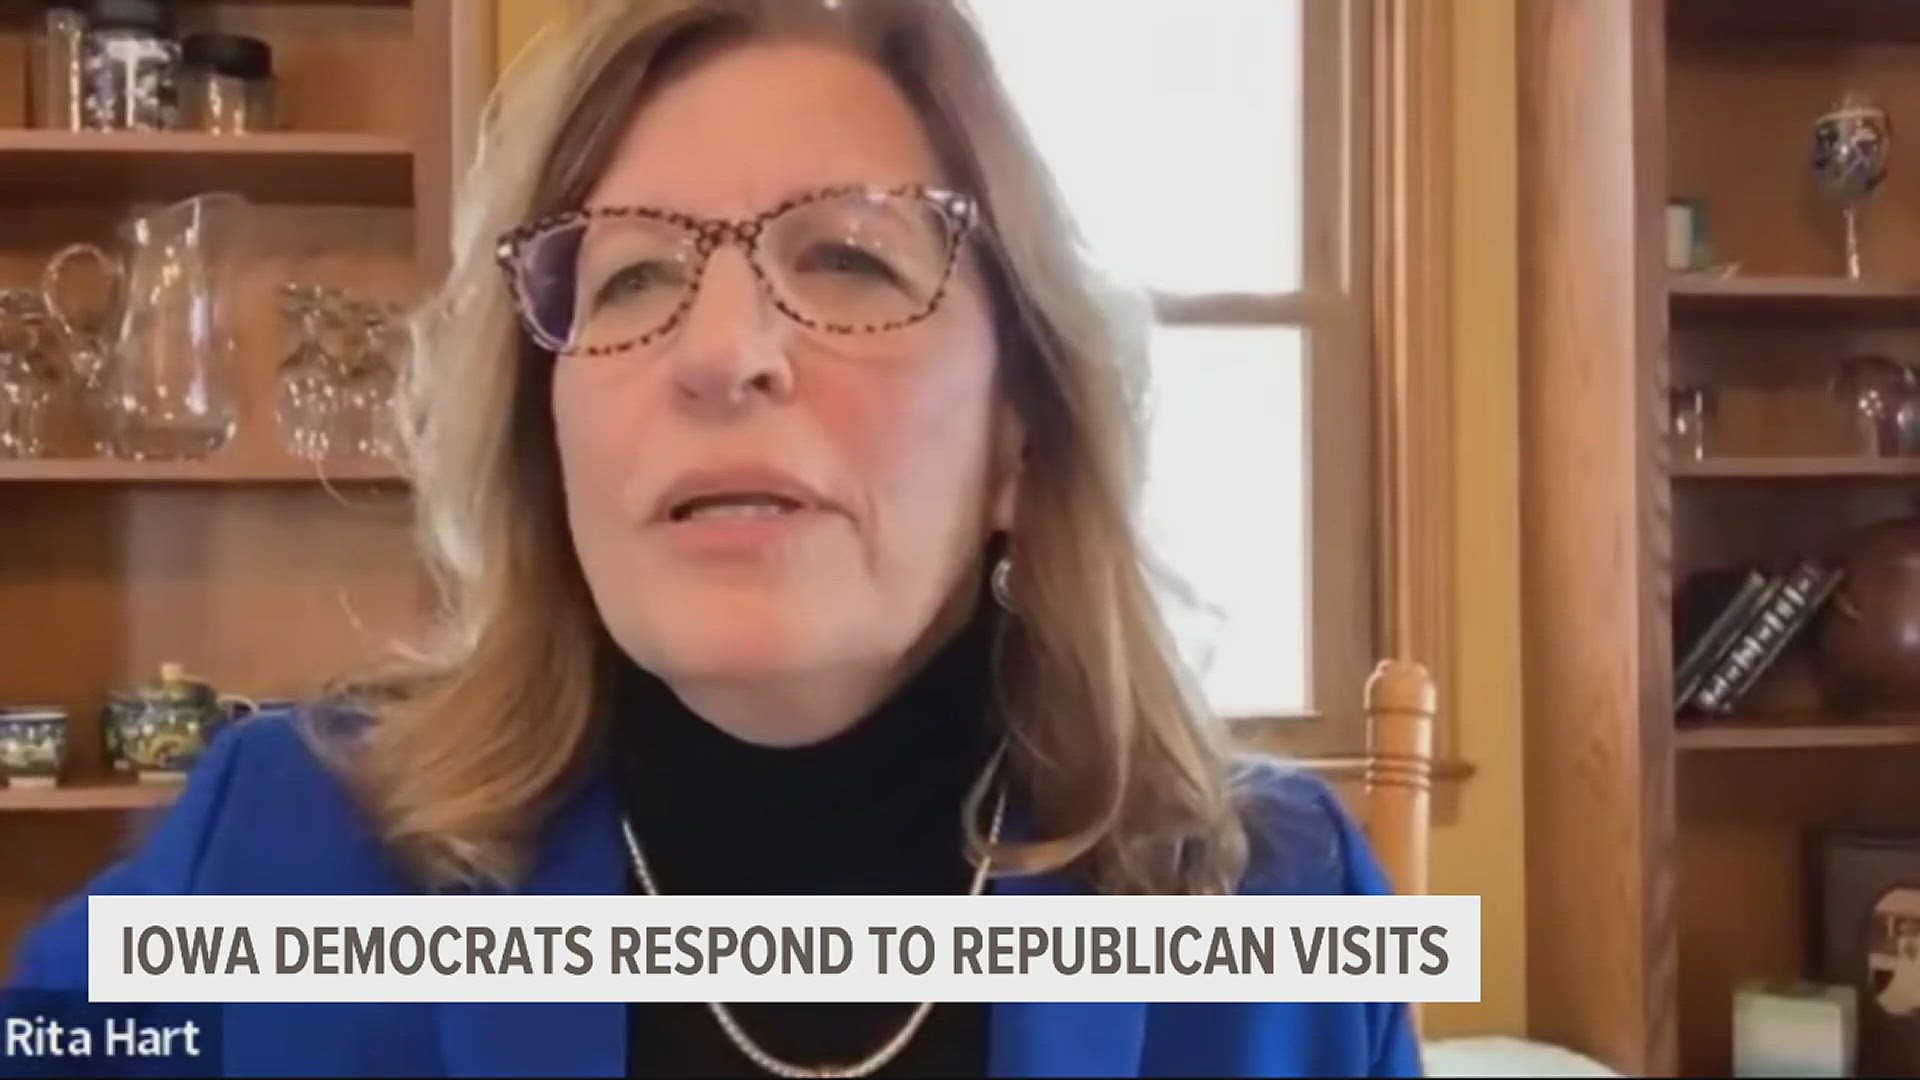 The Iowa Democratic Party chairwoman also commented on Trump's visit, saying that he doesn't know anything about education.